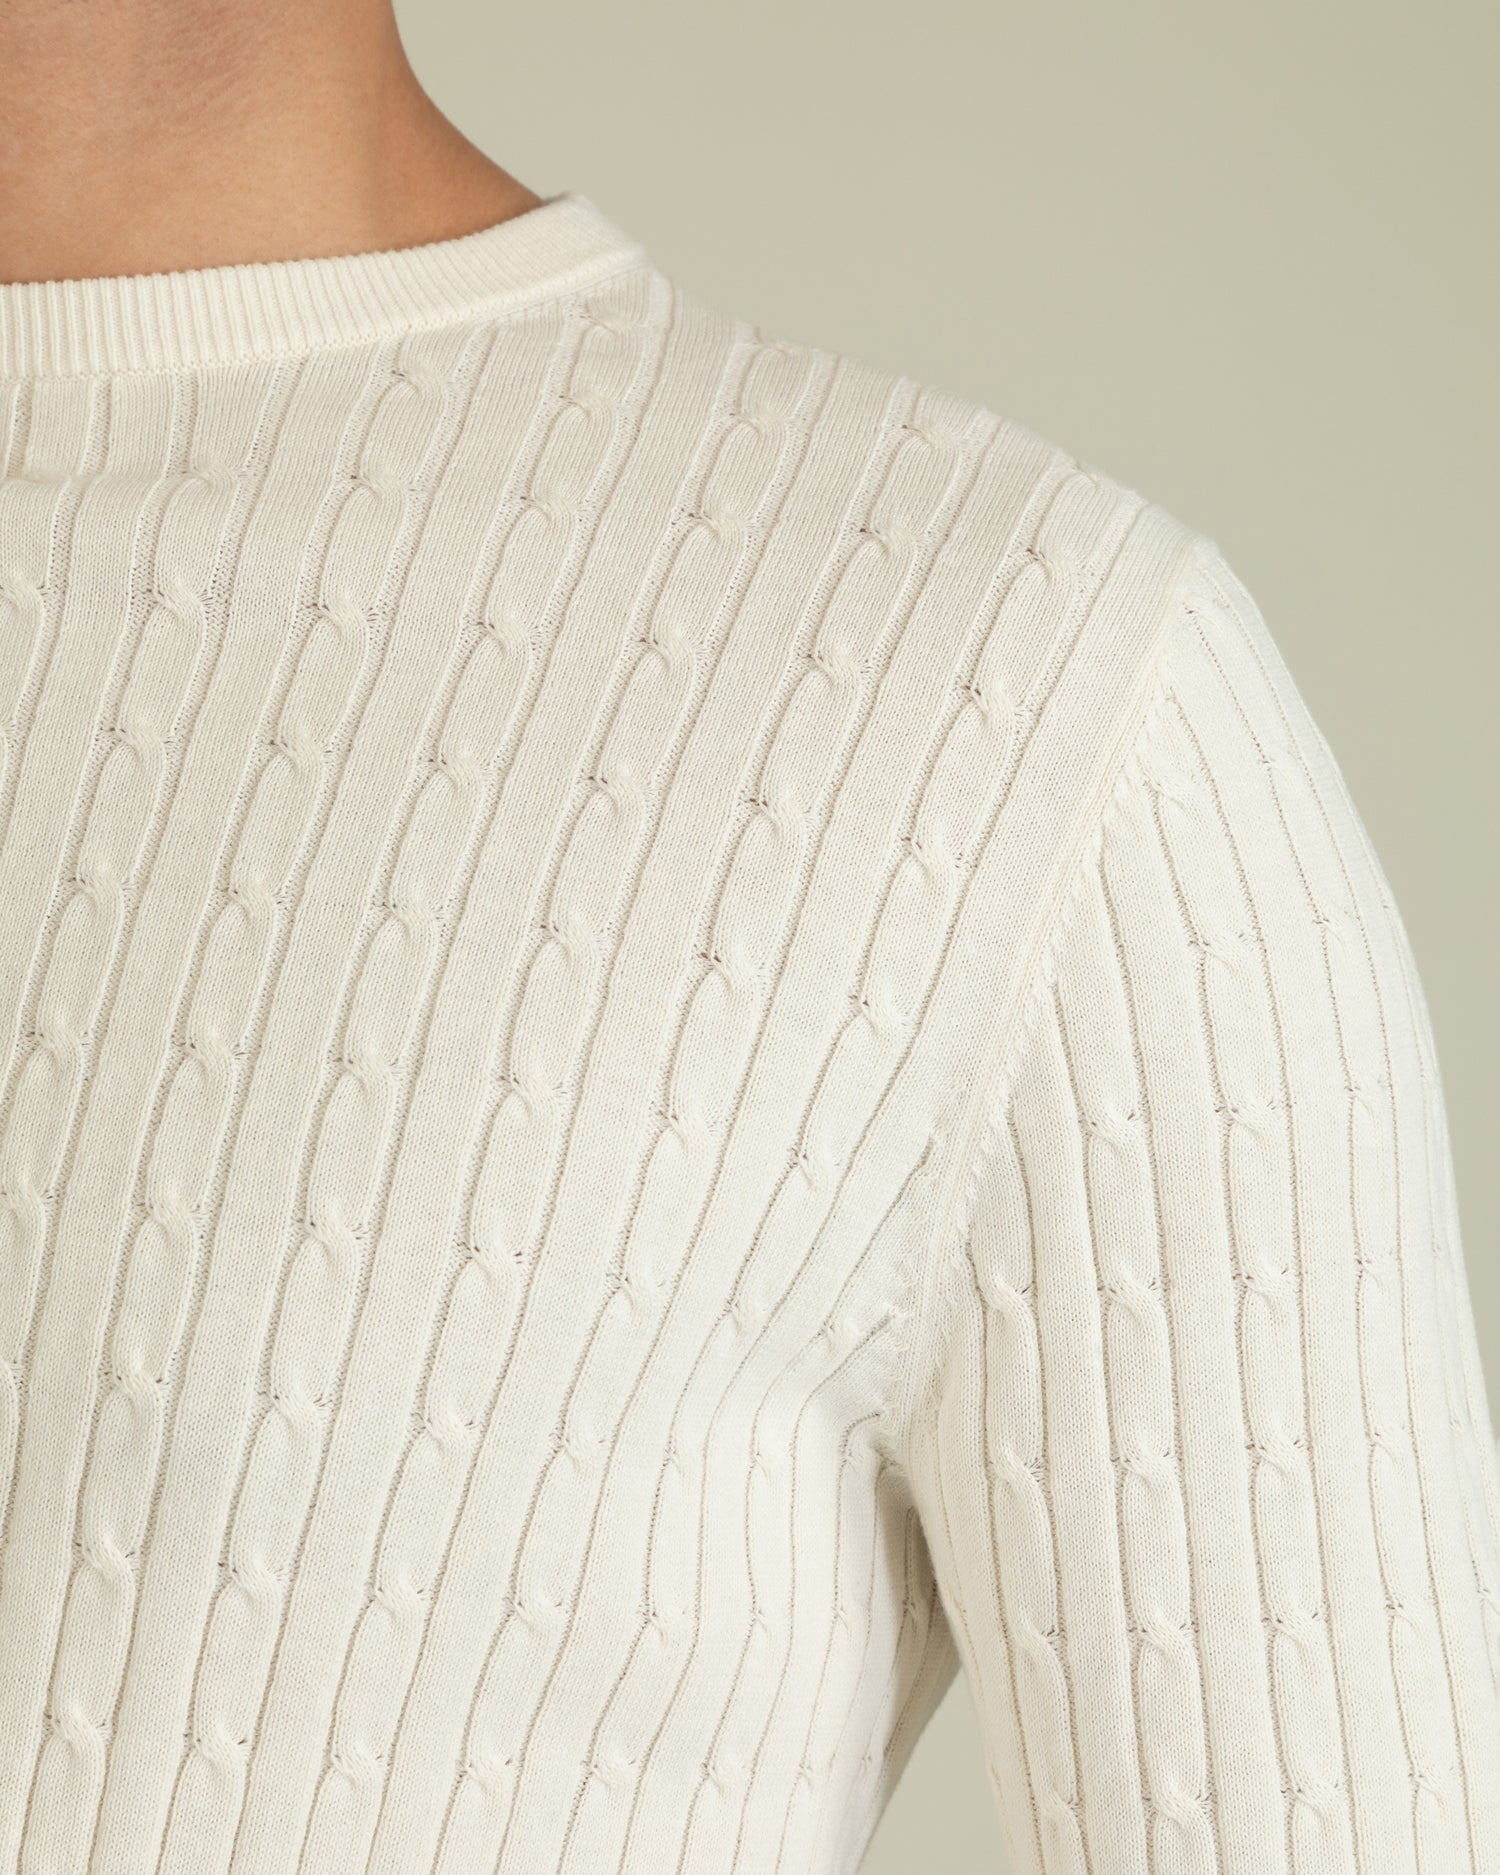 Summer Cable Knit in Ivory White (8624923345226)